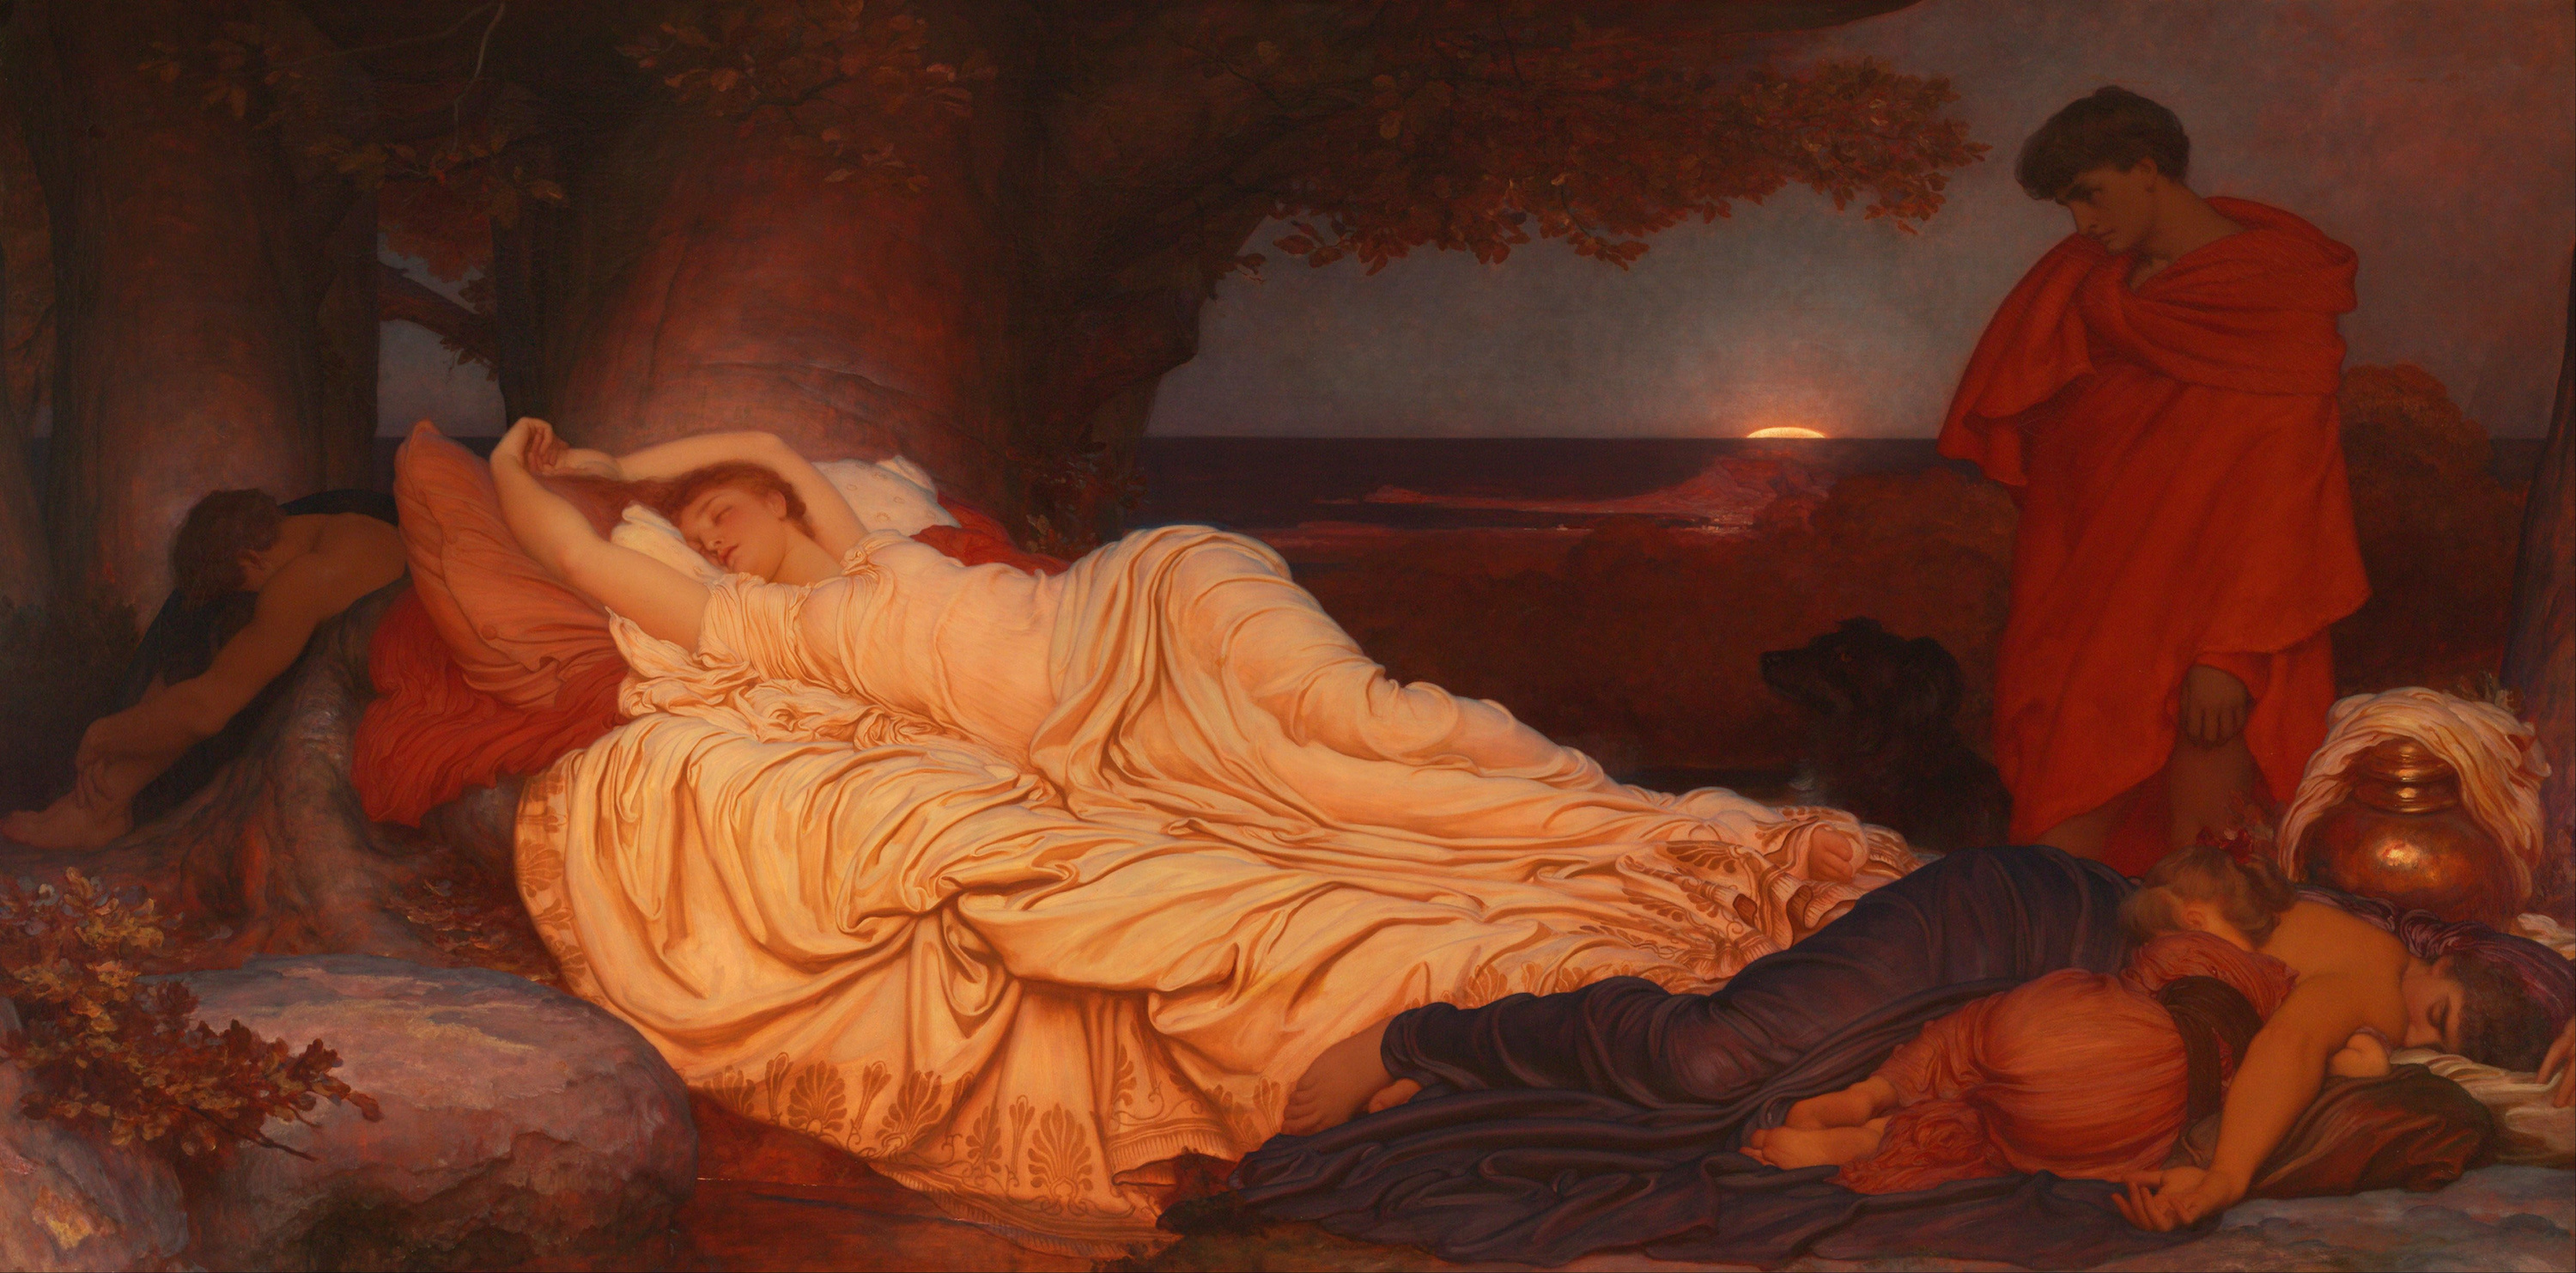 Cymon and Iphigenia by Frederic Leighton - 1884 - 390 x 218.4 cm Art Gallery of New South Wales